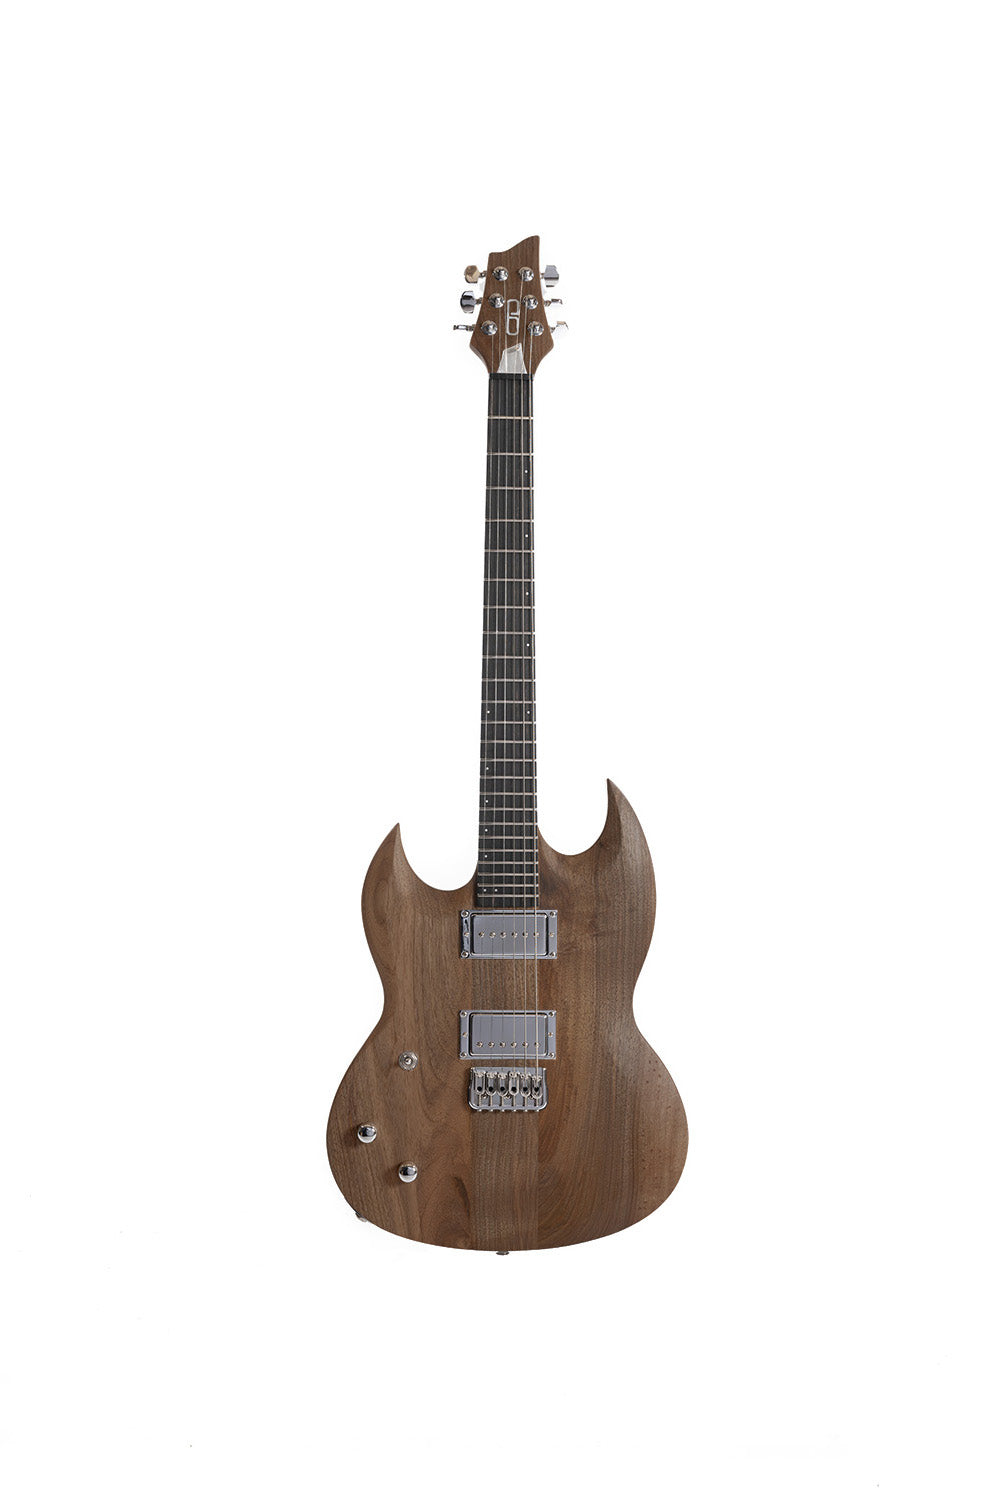 SY_Full_Walnut_Chocolate_Front_left_handed_De_Leeuw_Guitars_Paris_Made_in_France_Luthier_Guitar_Maker_France_Neck_Through_Manche_Traversant